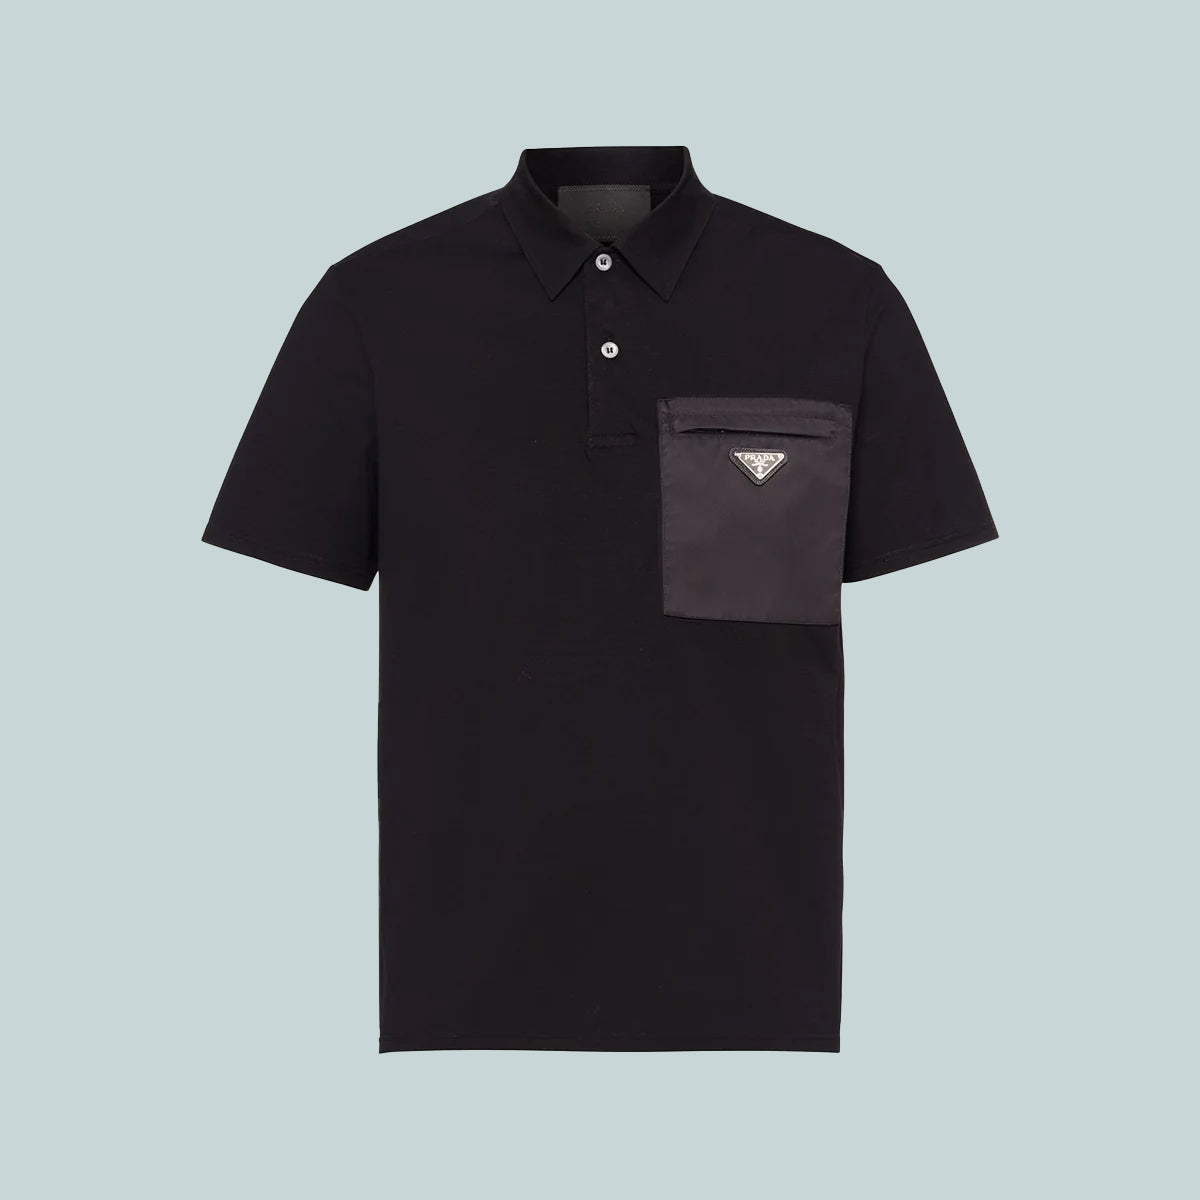 Stretch cotton polo shirt with nylon details